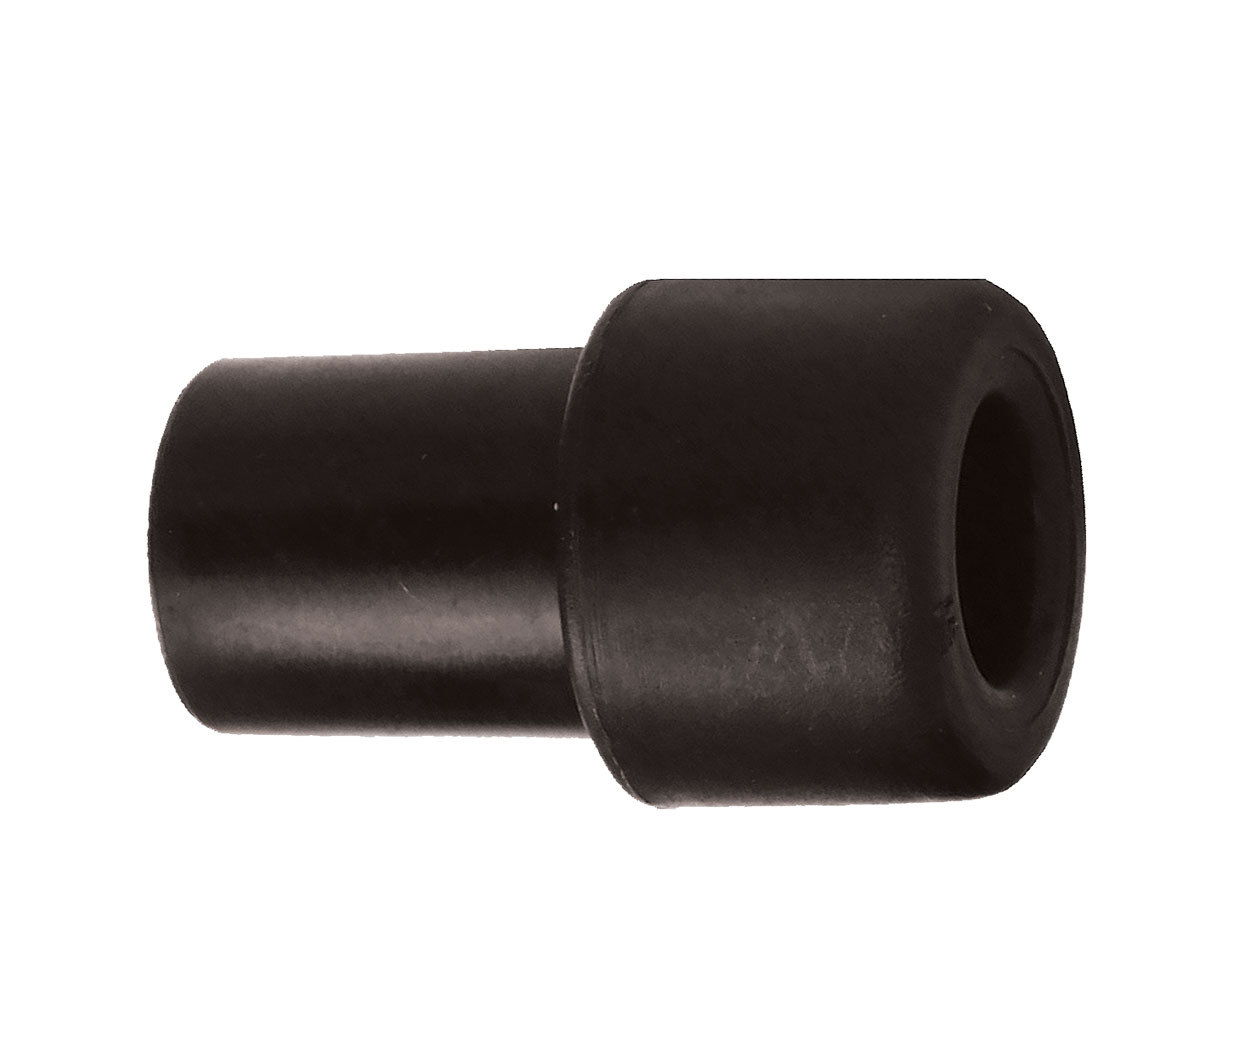 ICCONS PISTON PLUG SUITS 18MM DRILLED HOLE 